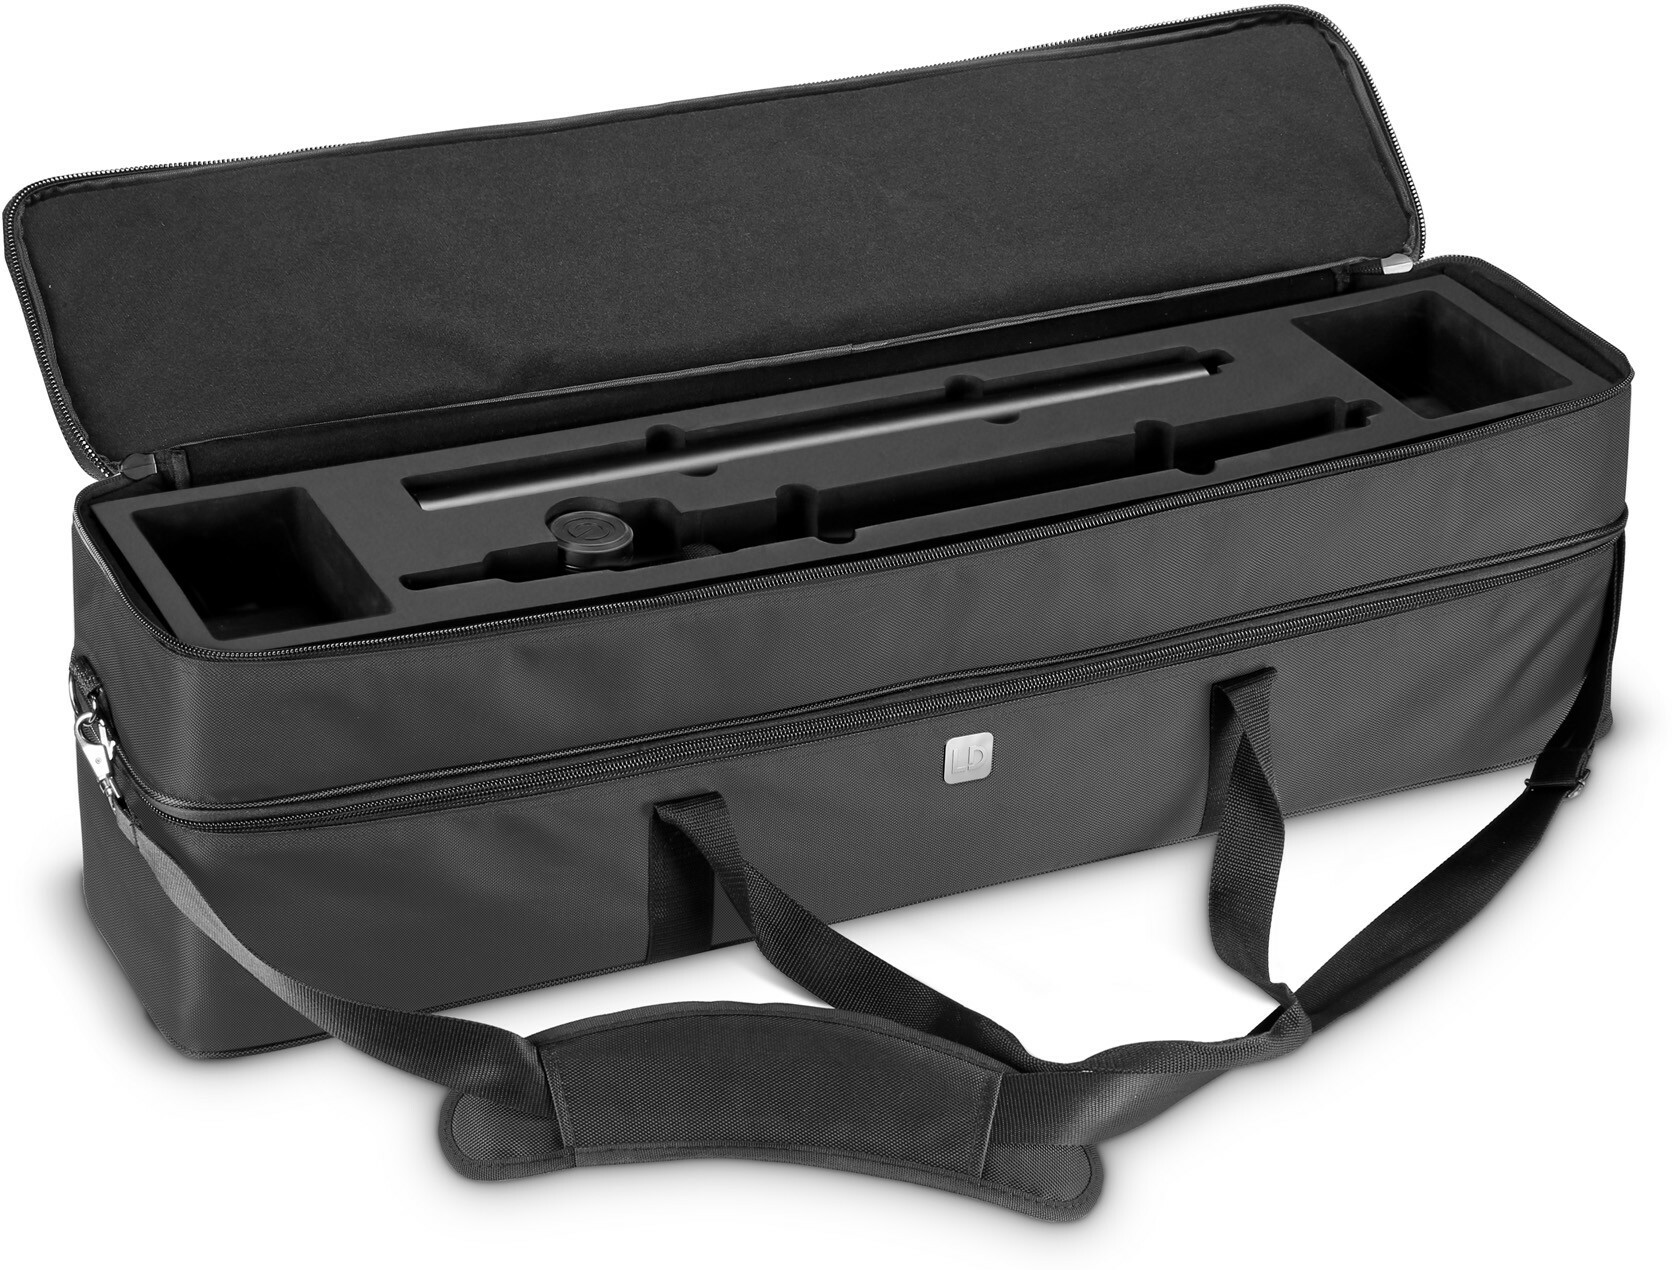 Ld Systems Curv 500 Ts Sat Bag - Bag for speakers & subwoofer - Main picture